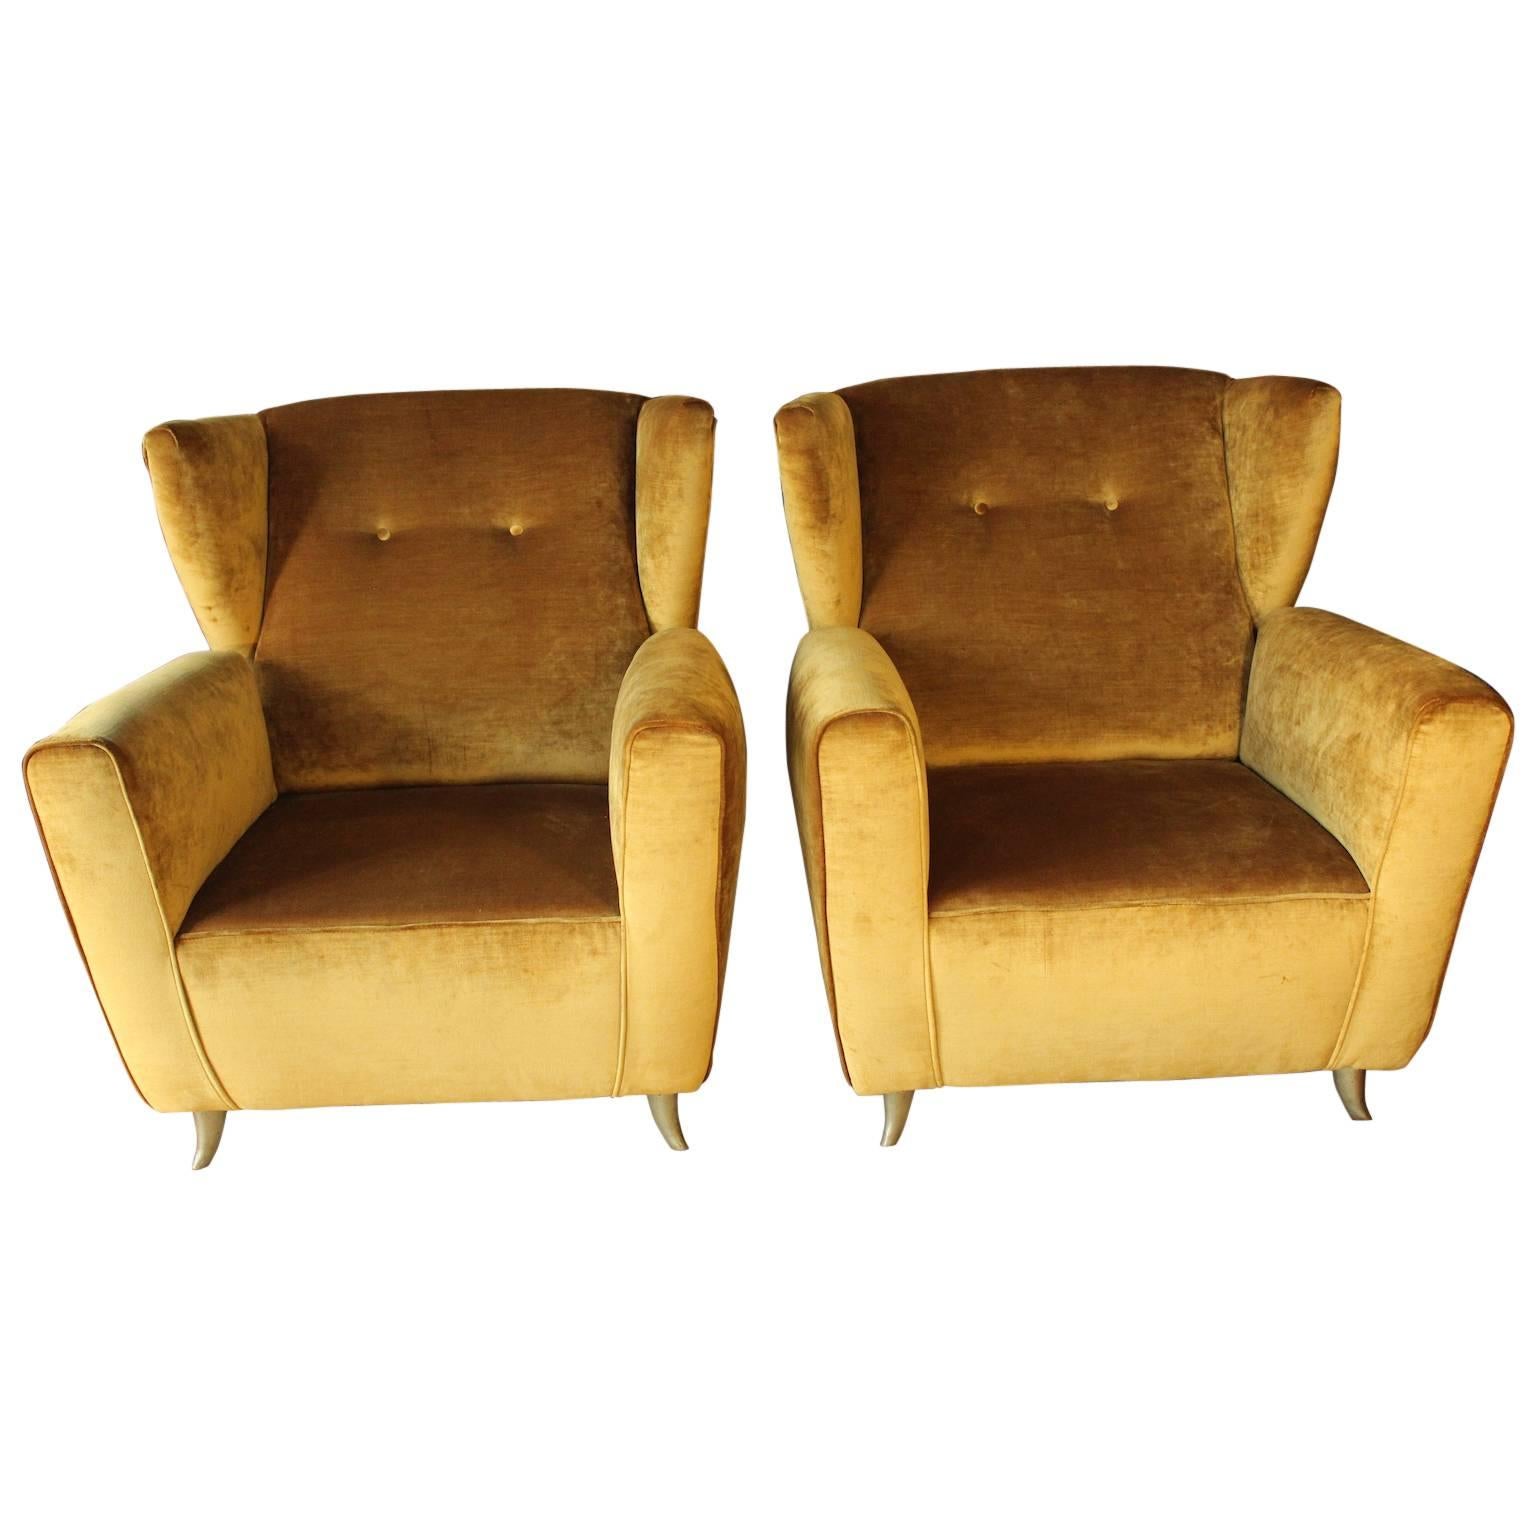 Pair of Contemporary Gold Velvet Armchairs with Brass Fittings, 1960s Style For Sale